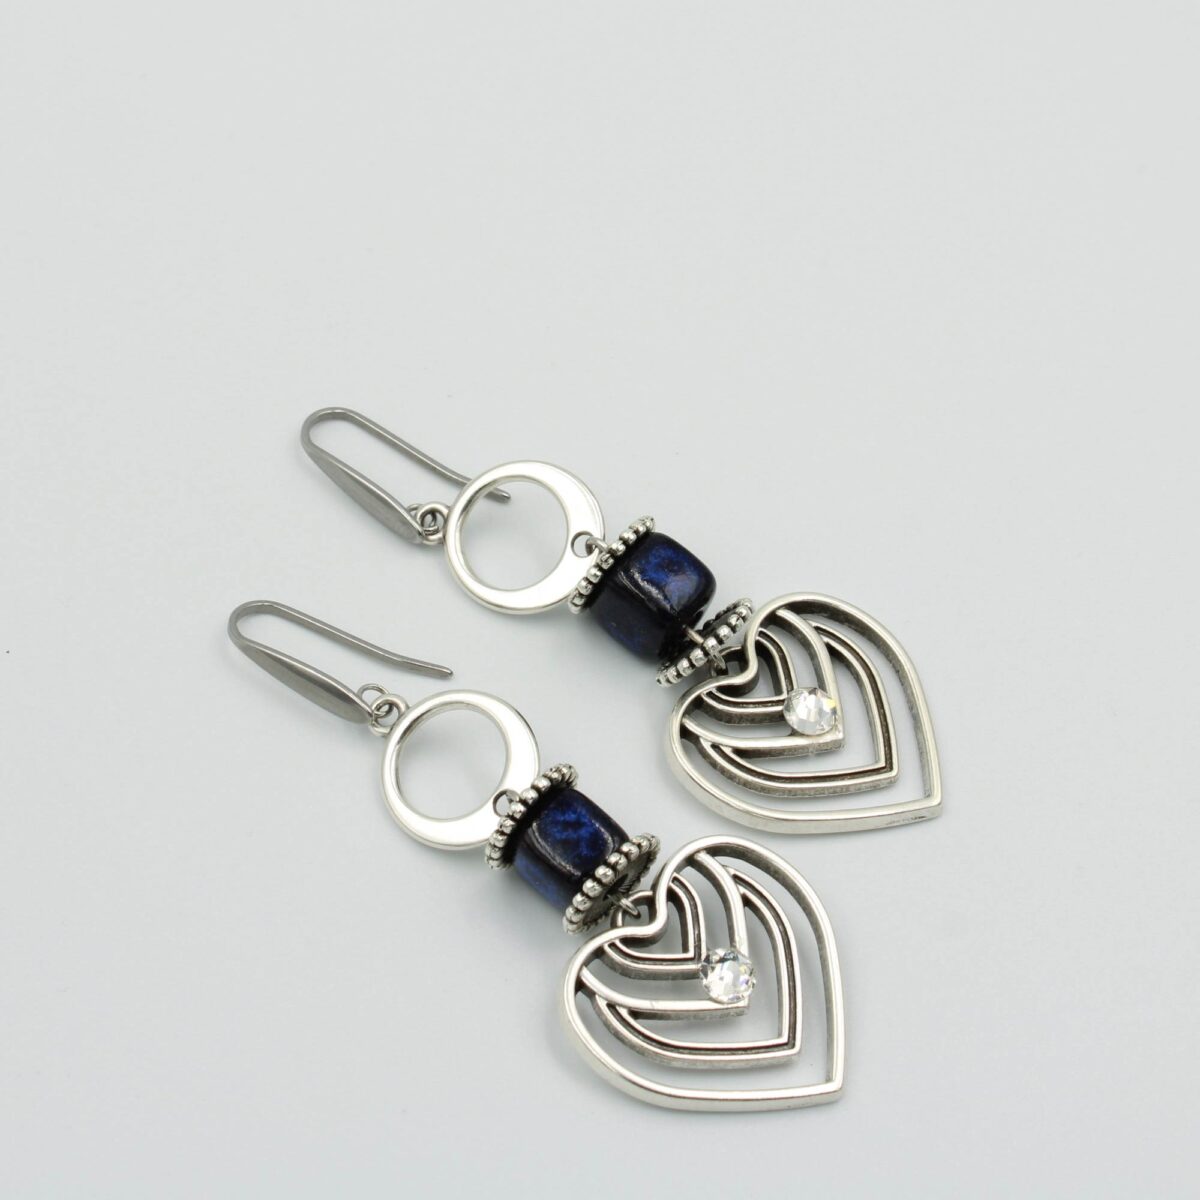 Pendant Earrings with Silver Heart and Blue Dice